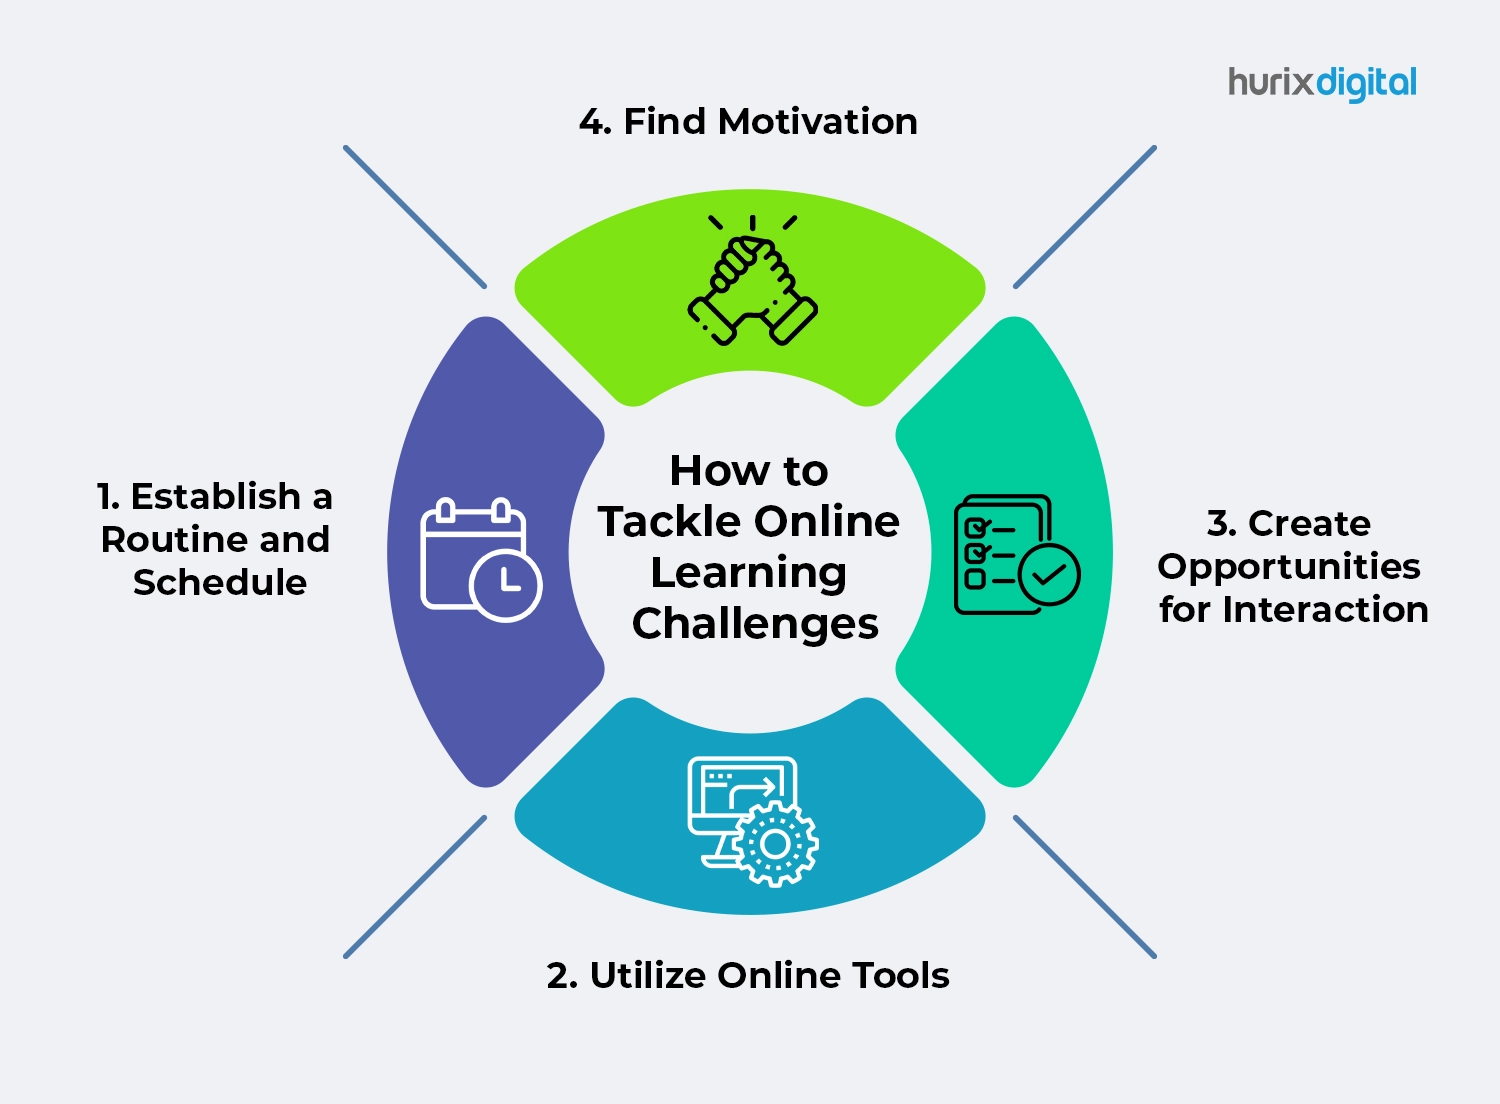 How to Tackle Online Learning Challenges